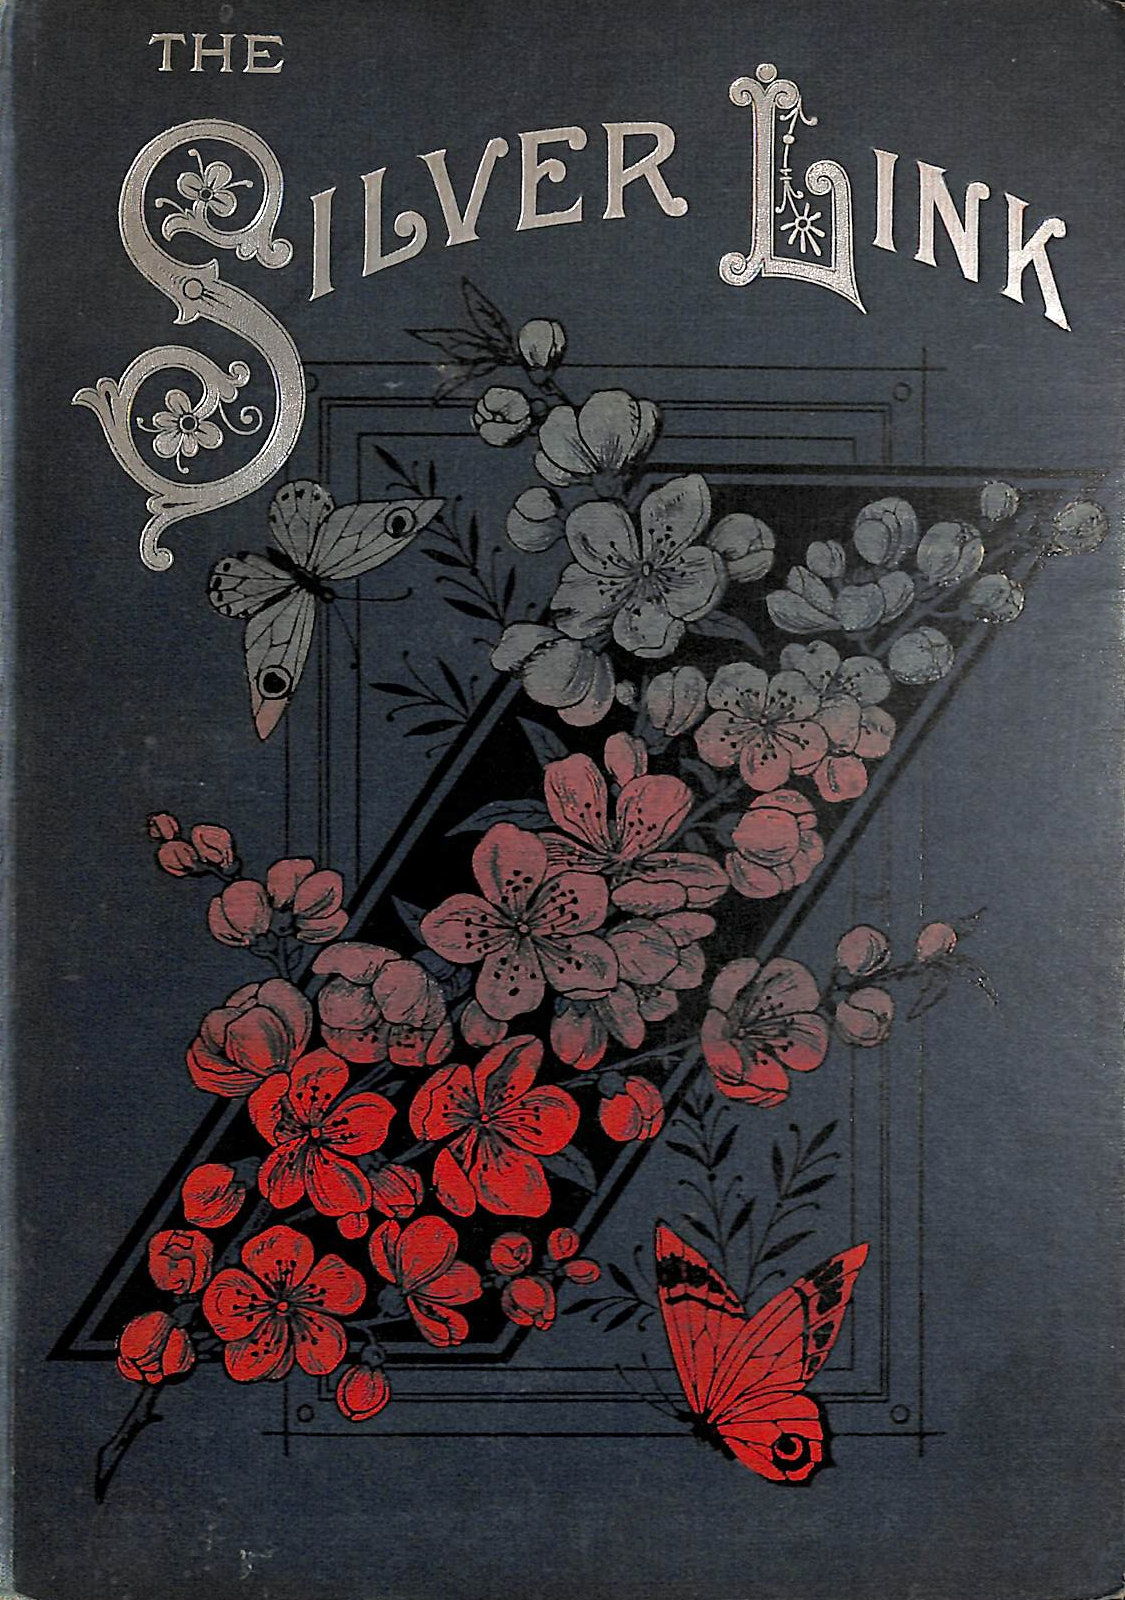 VARIOUS - The Silver Link, Volume II. 1893